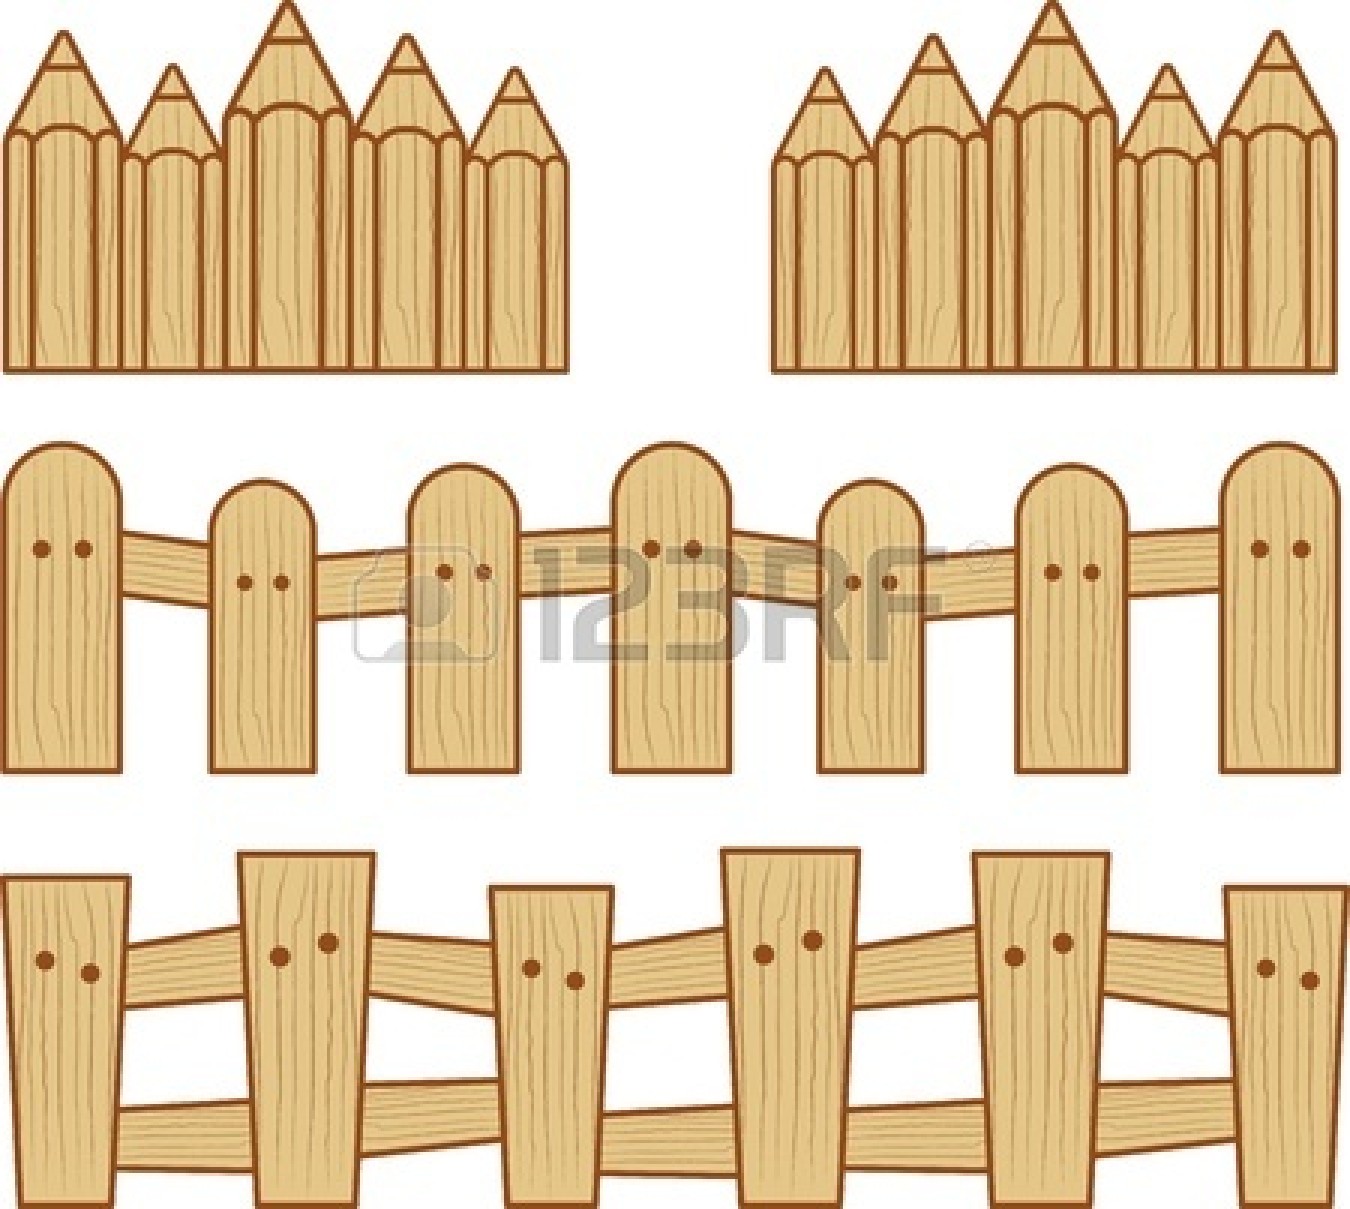 ground clipart fence